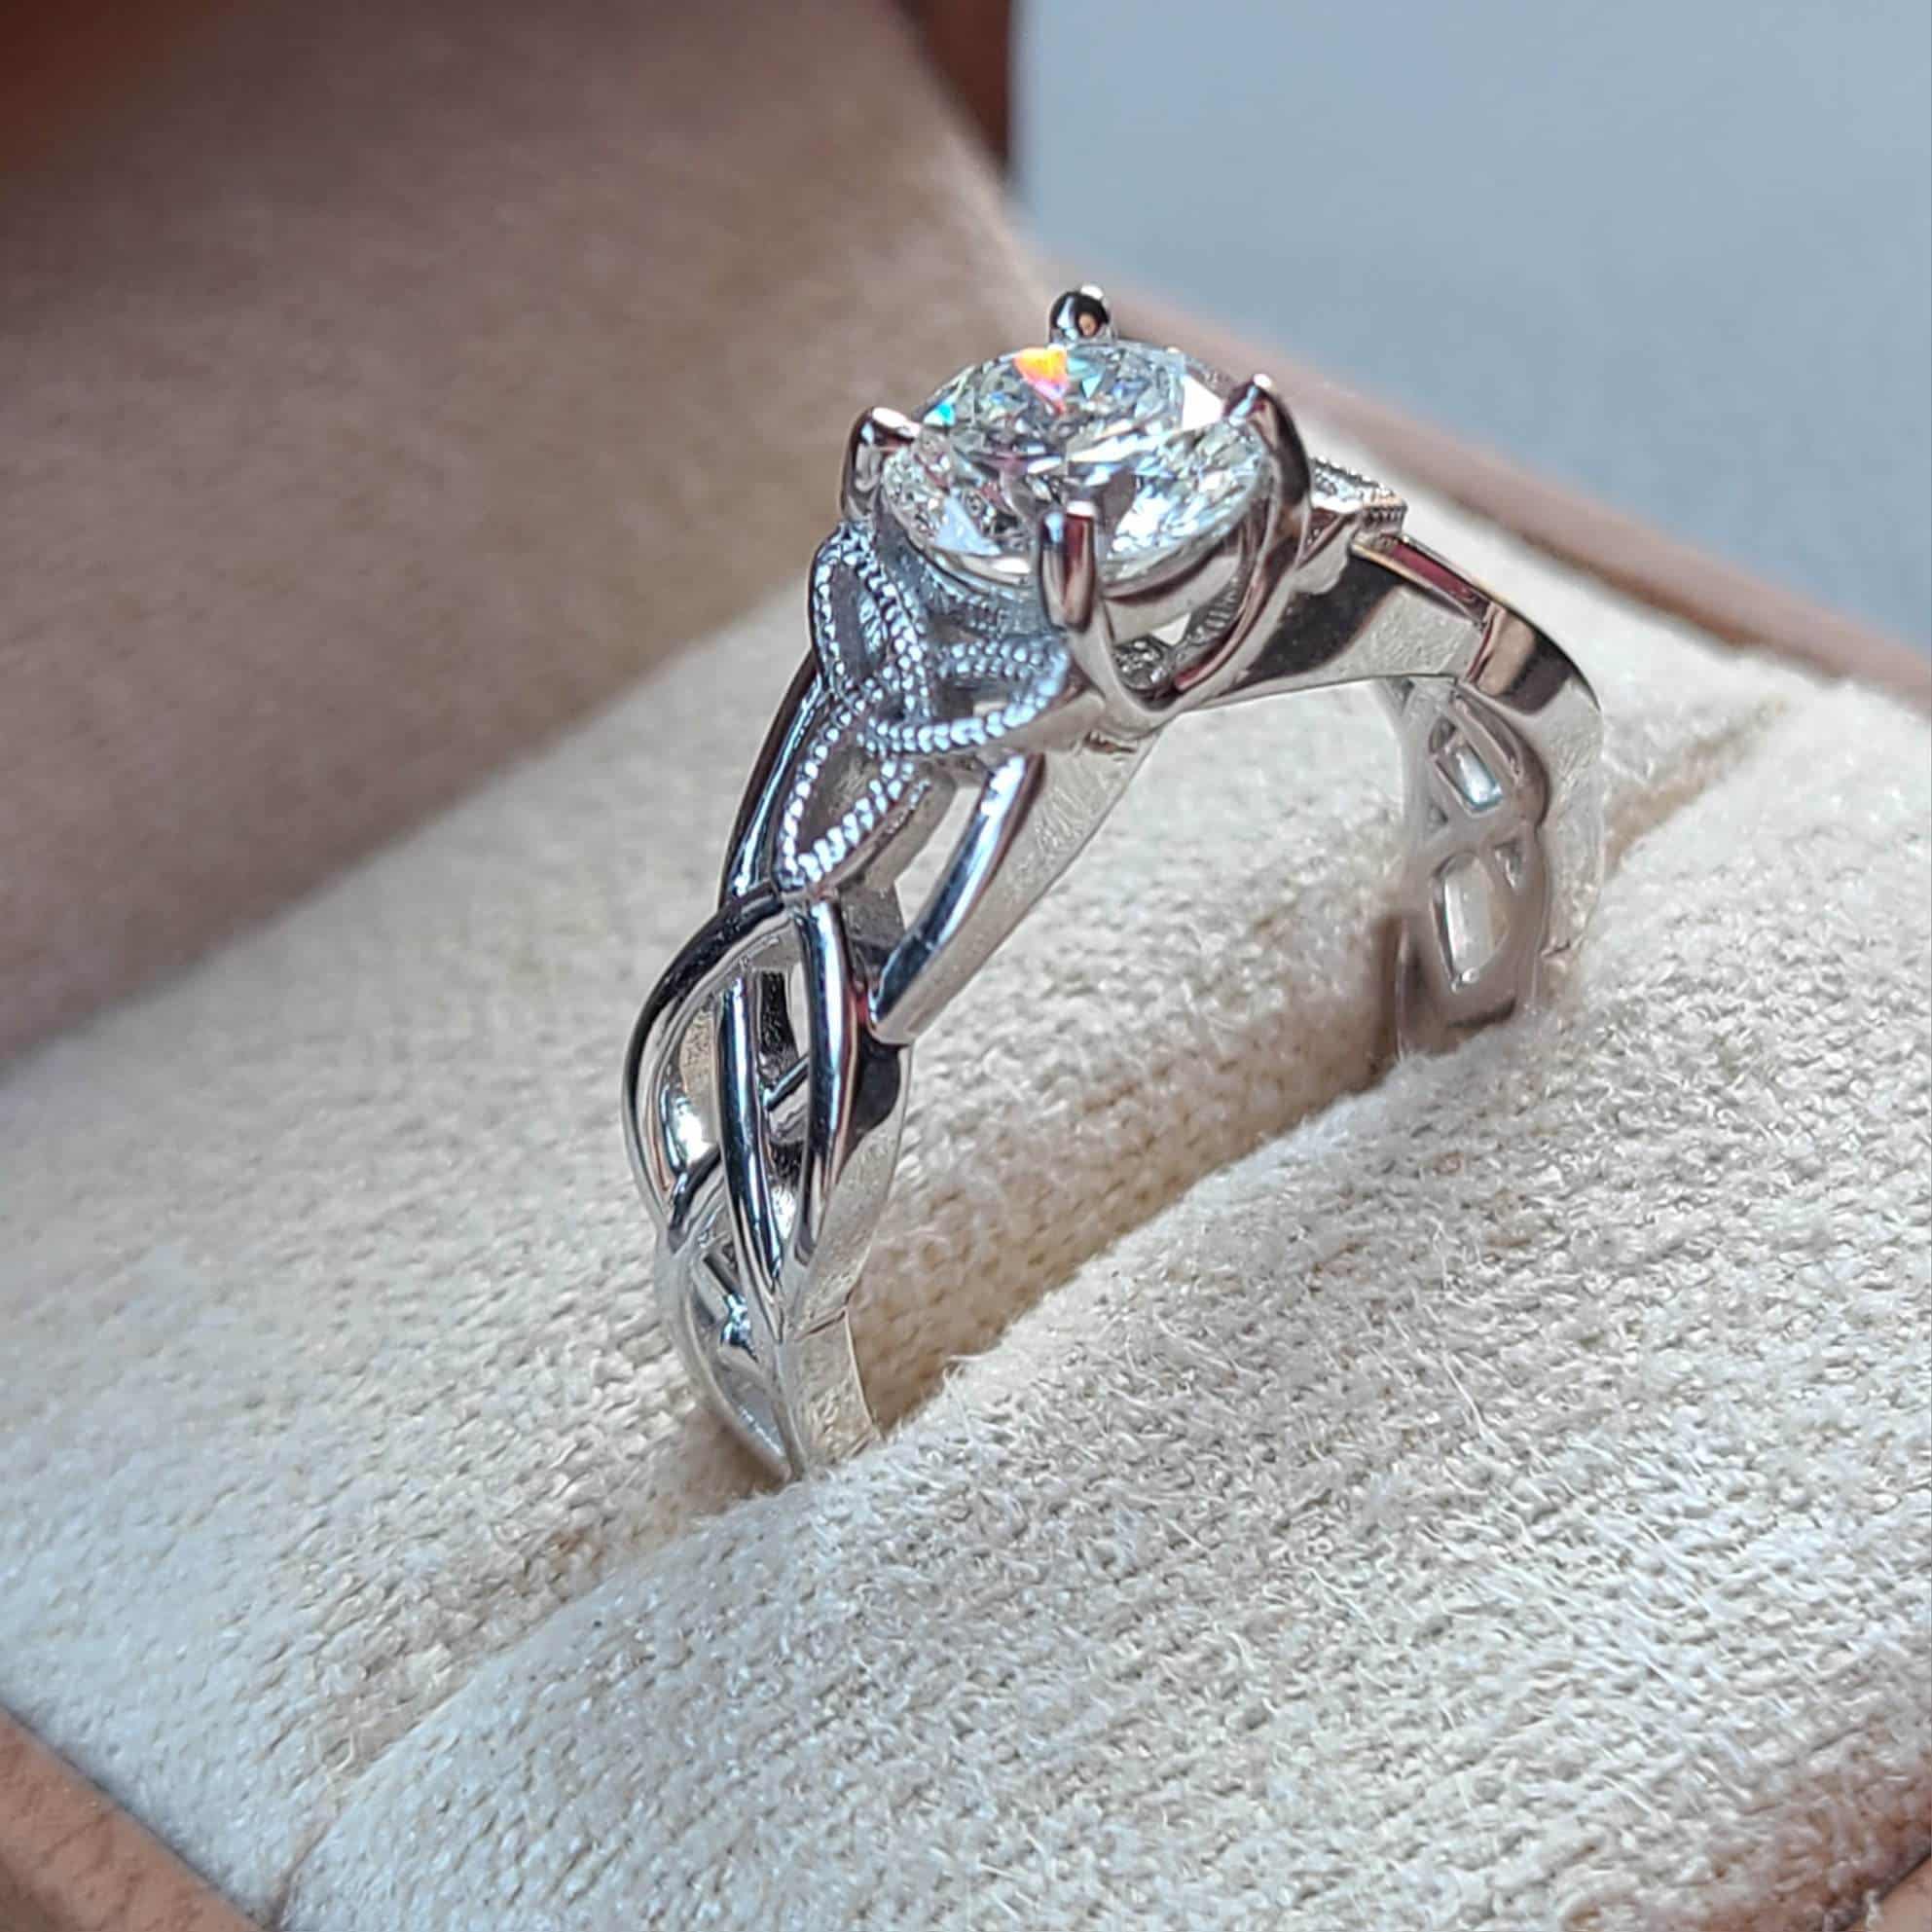 engagement ring with single stone in the center and intricate design on the band